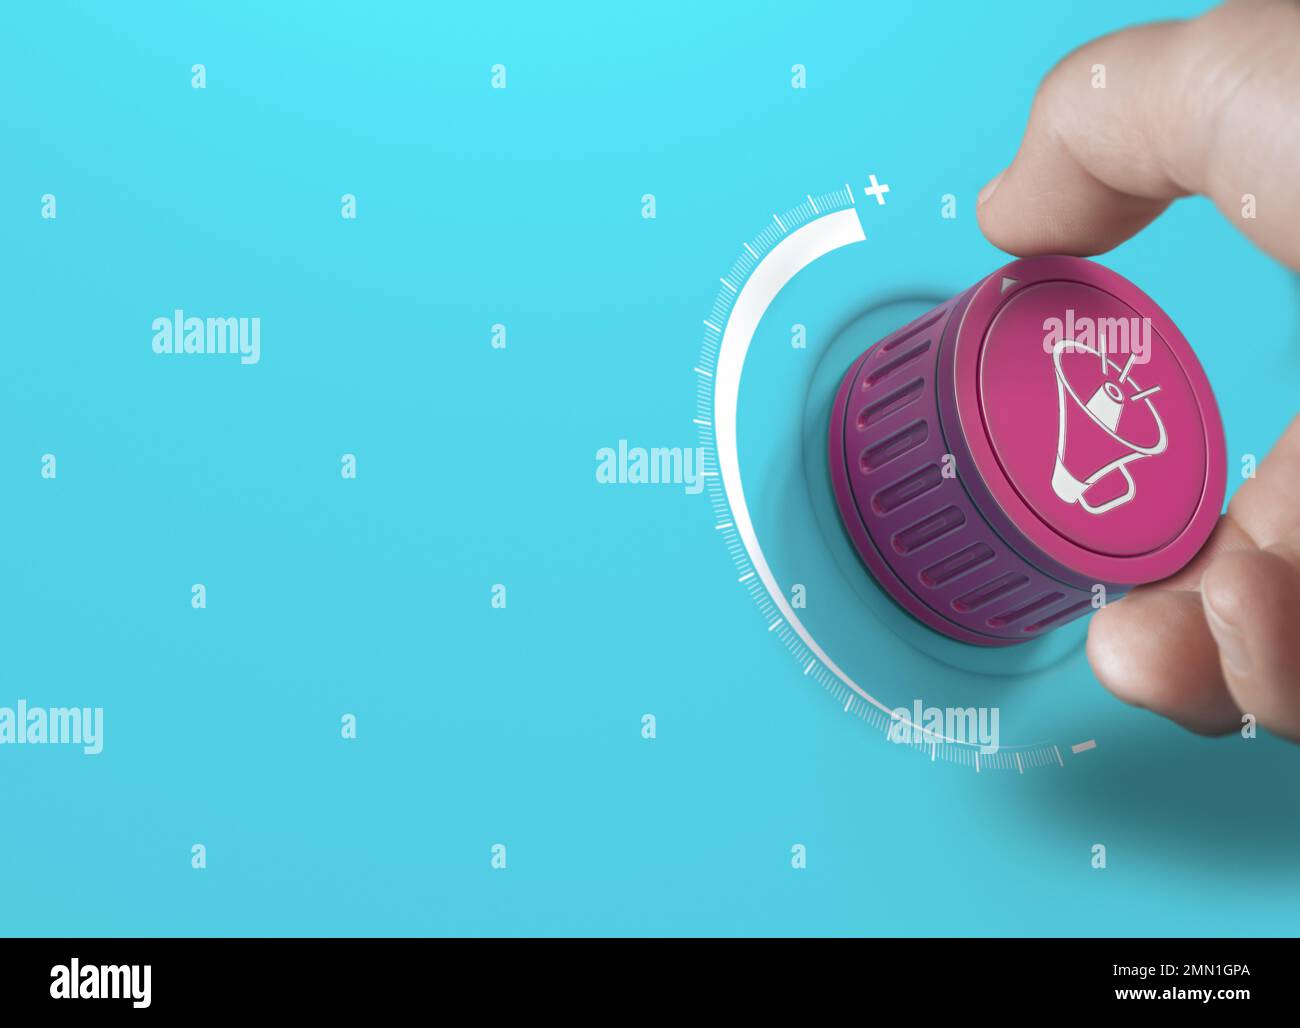 Man turning a pink knob with a megaphon icon. Brand communication strategy and advertising concept over blue background with copy space. Stock Photo